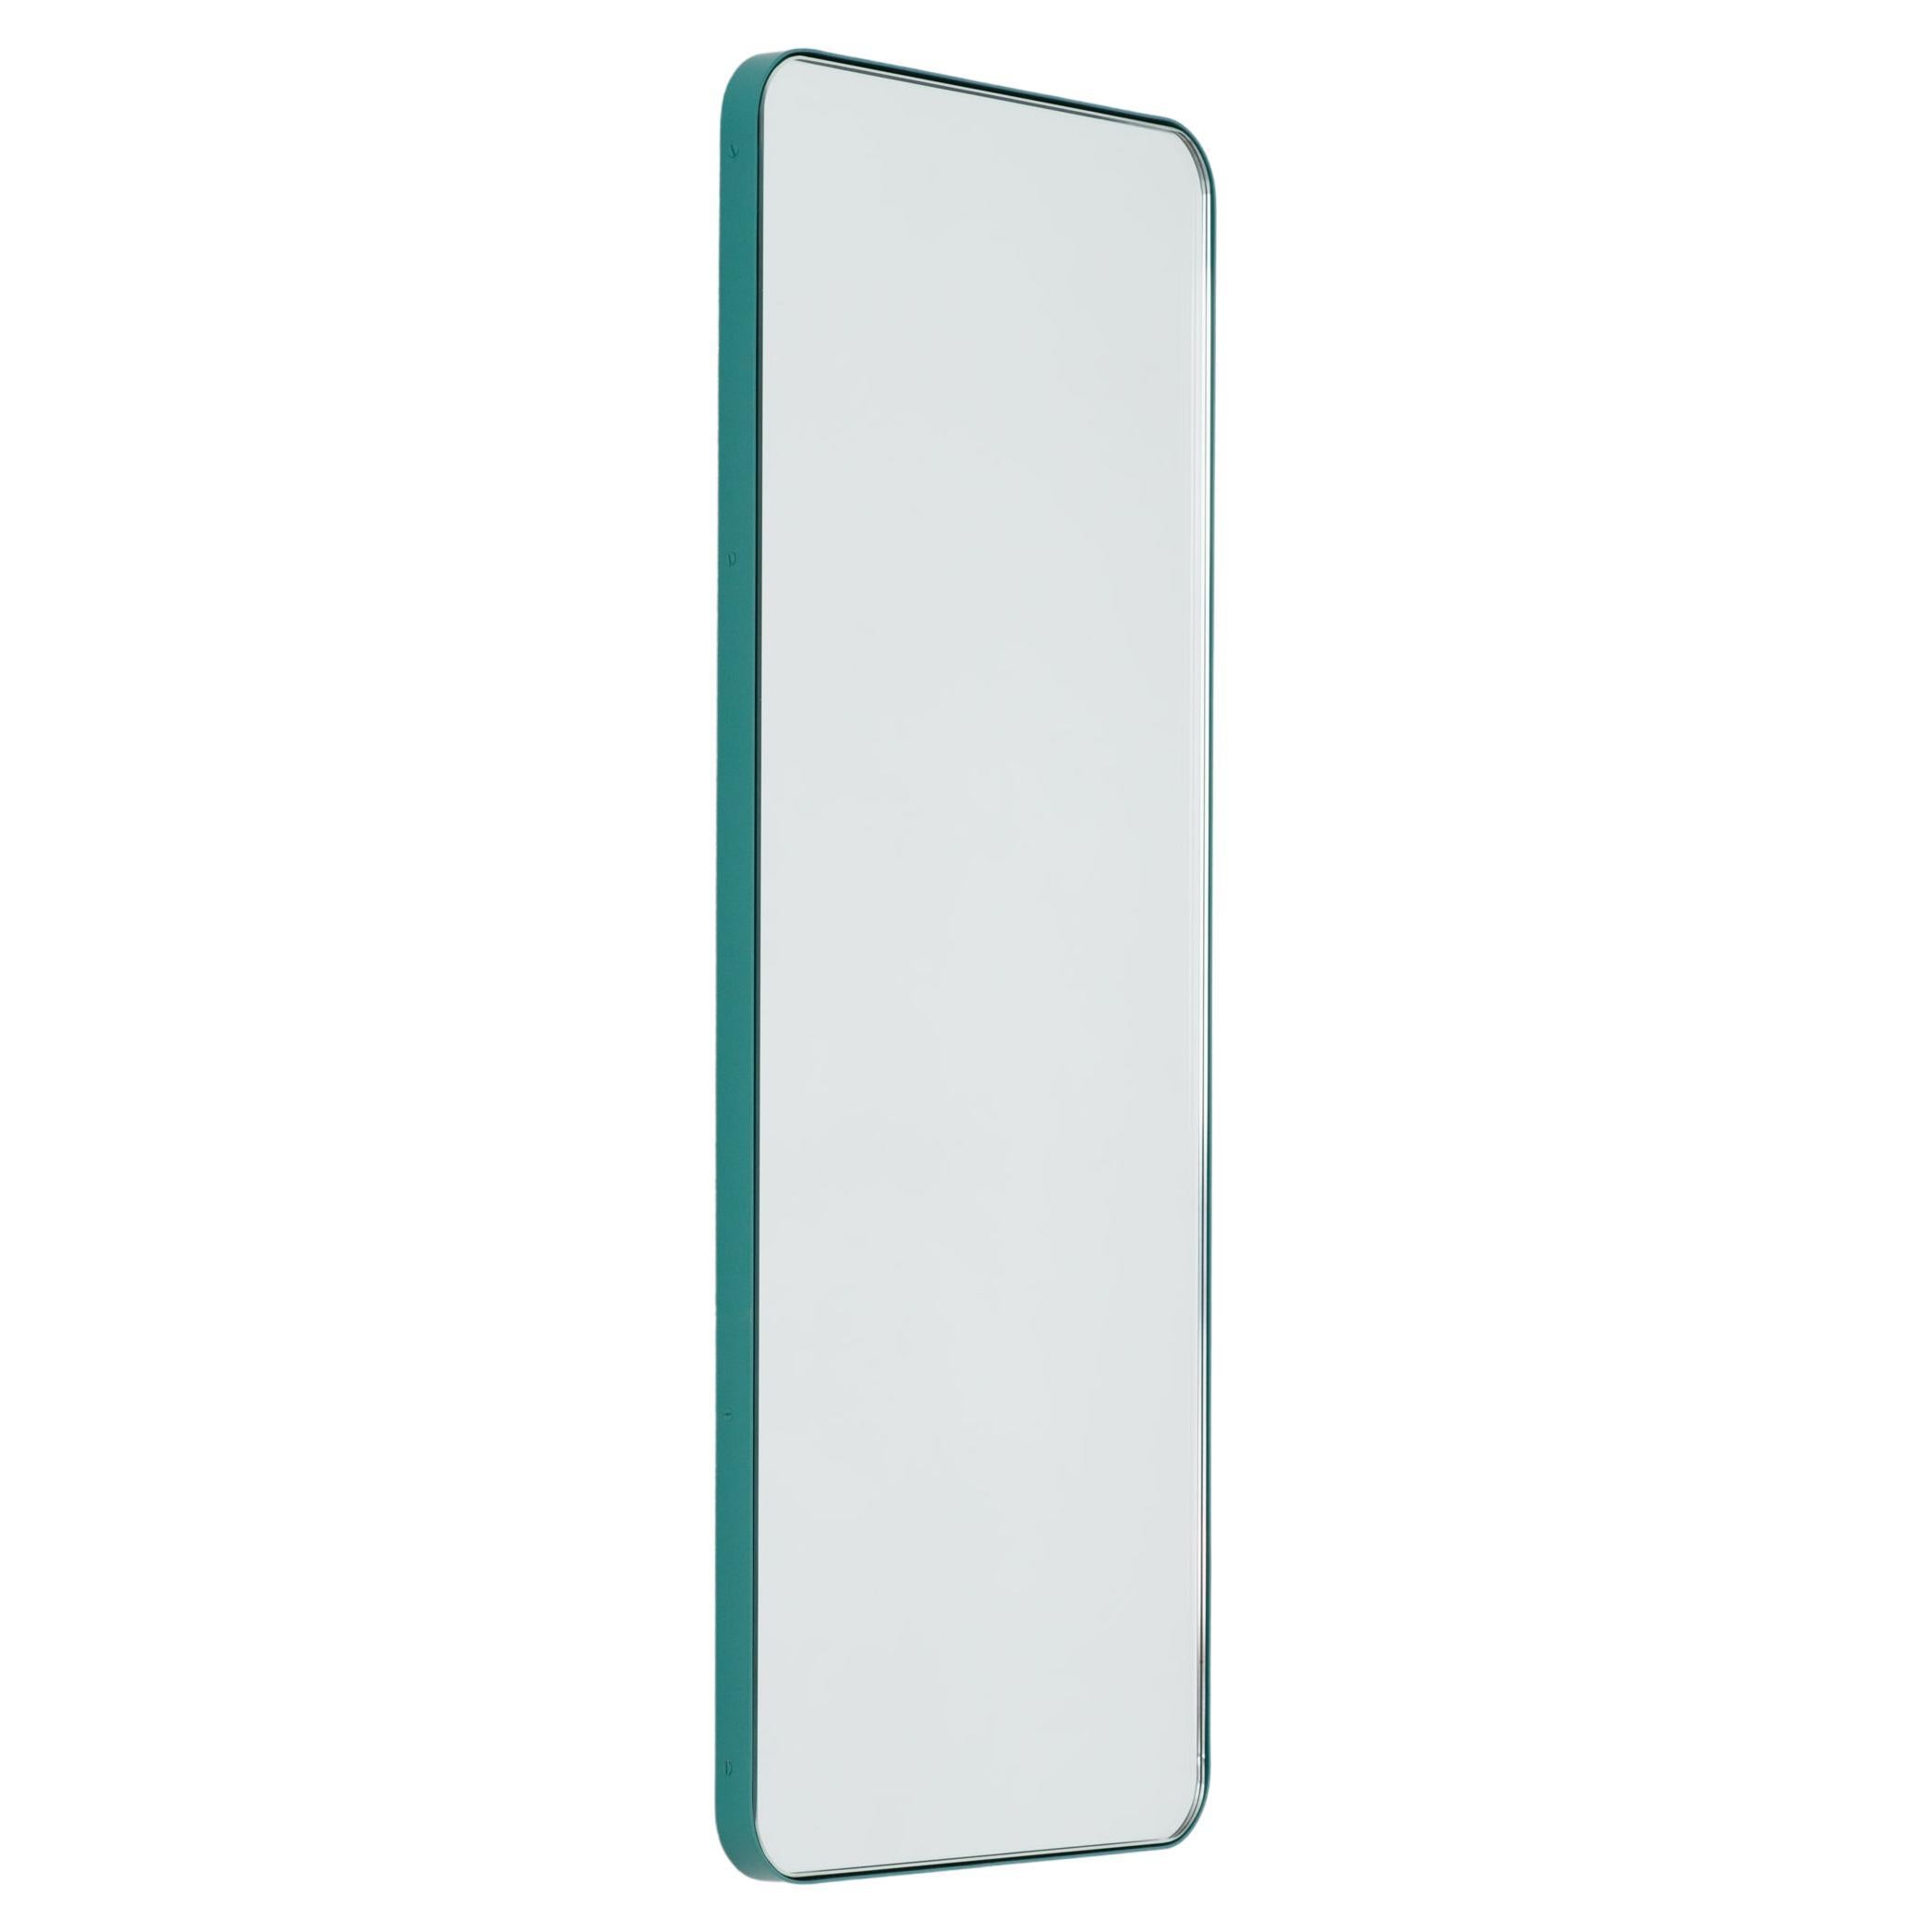 Quadris Rectangular Modern Mirror with a Mint Turquoise Frame,Customisable,Small